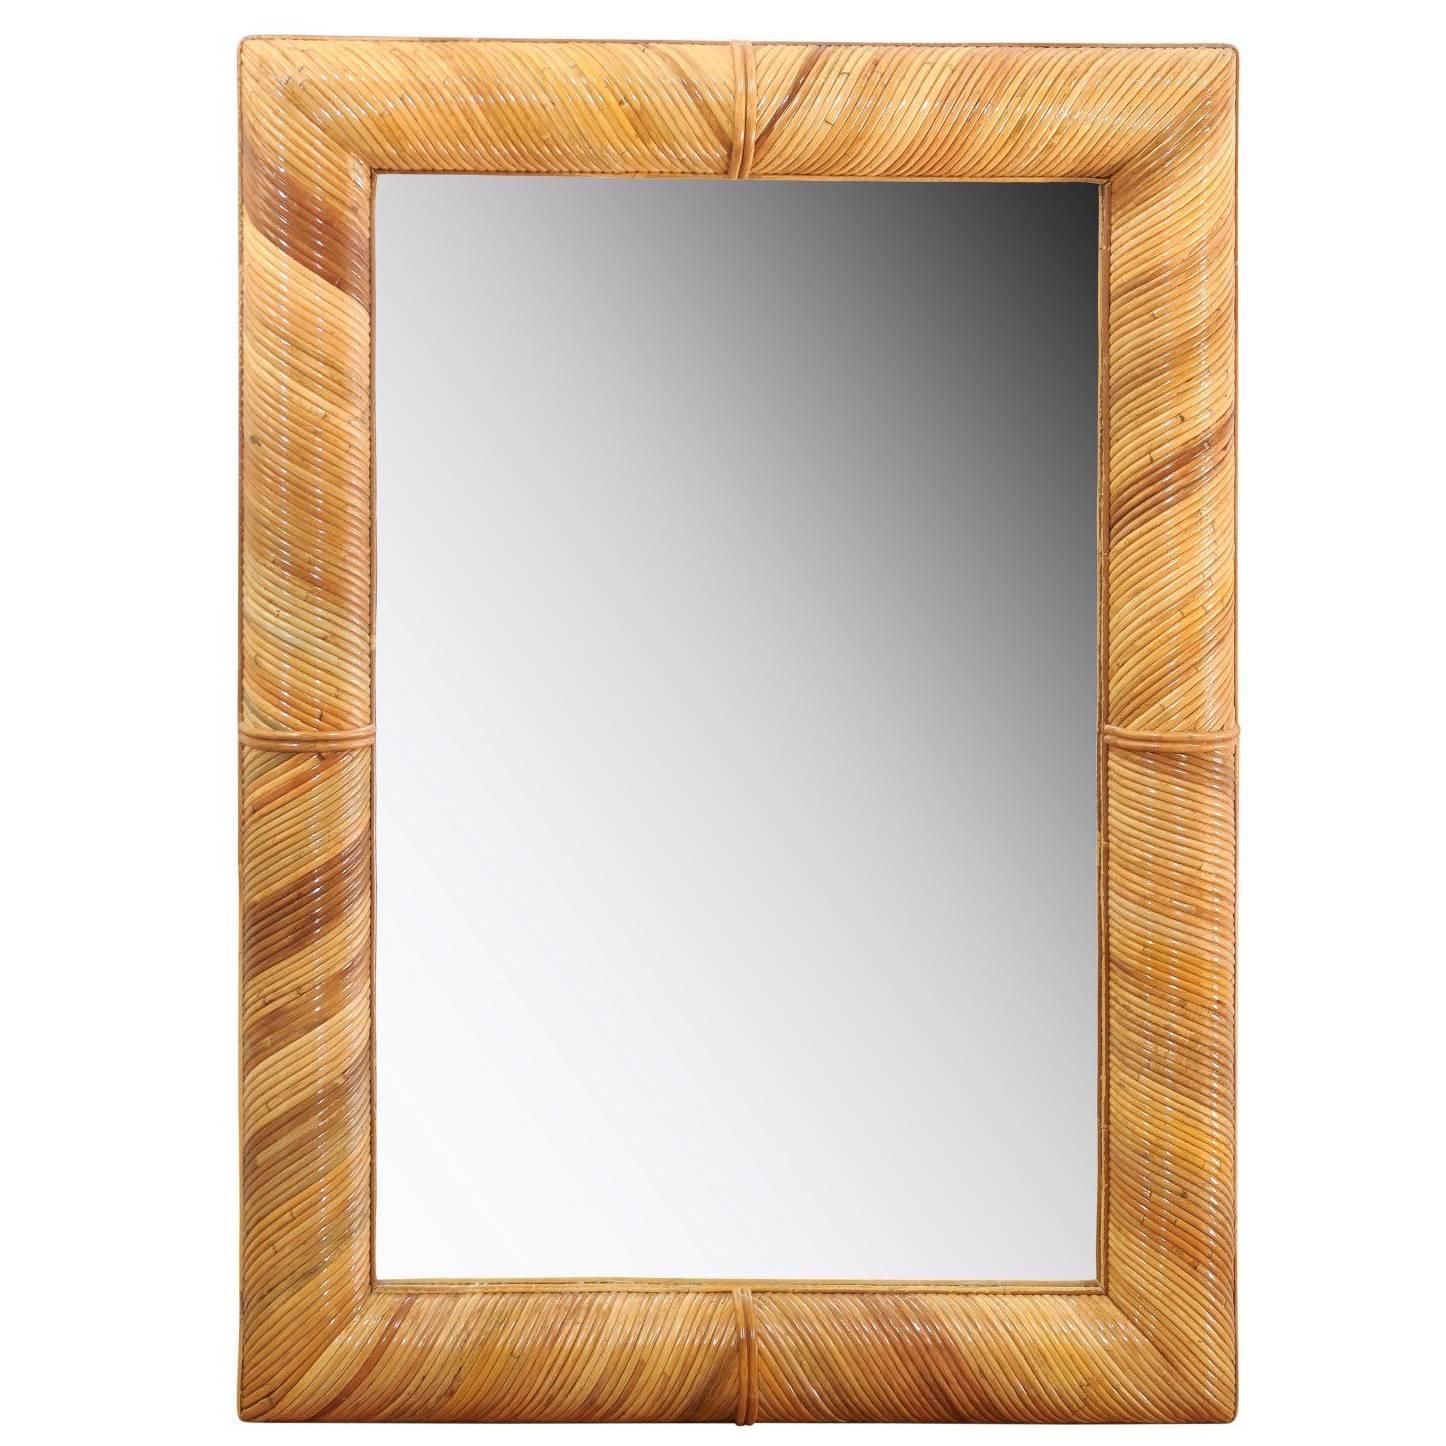 A fabulous pair of organic mirrors, circa 1980. Stout hardwood frame painstakingly veneered in diagonally applied reed bamboo. Exceptional craftsmanship. Exquisite jewelry! Excellent restored condition. The pieces have been professionally cleaned